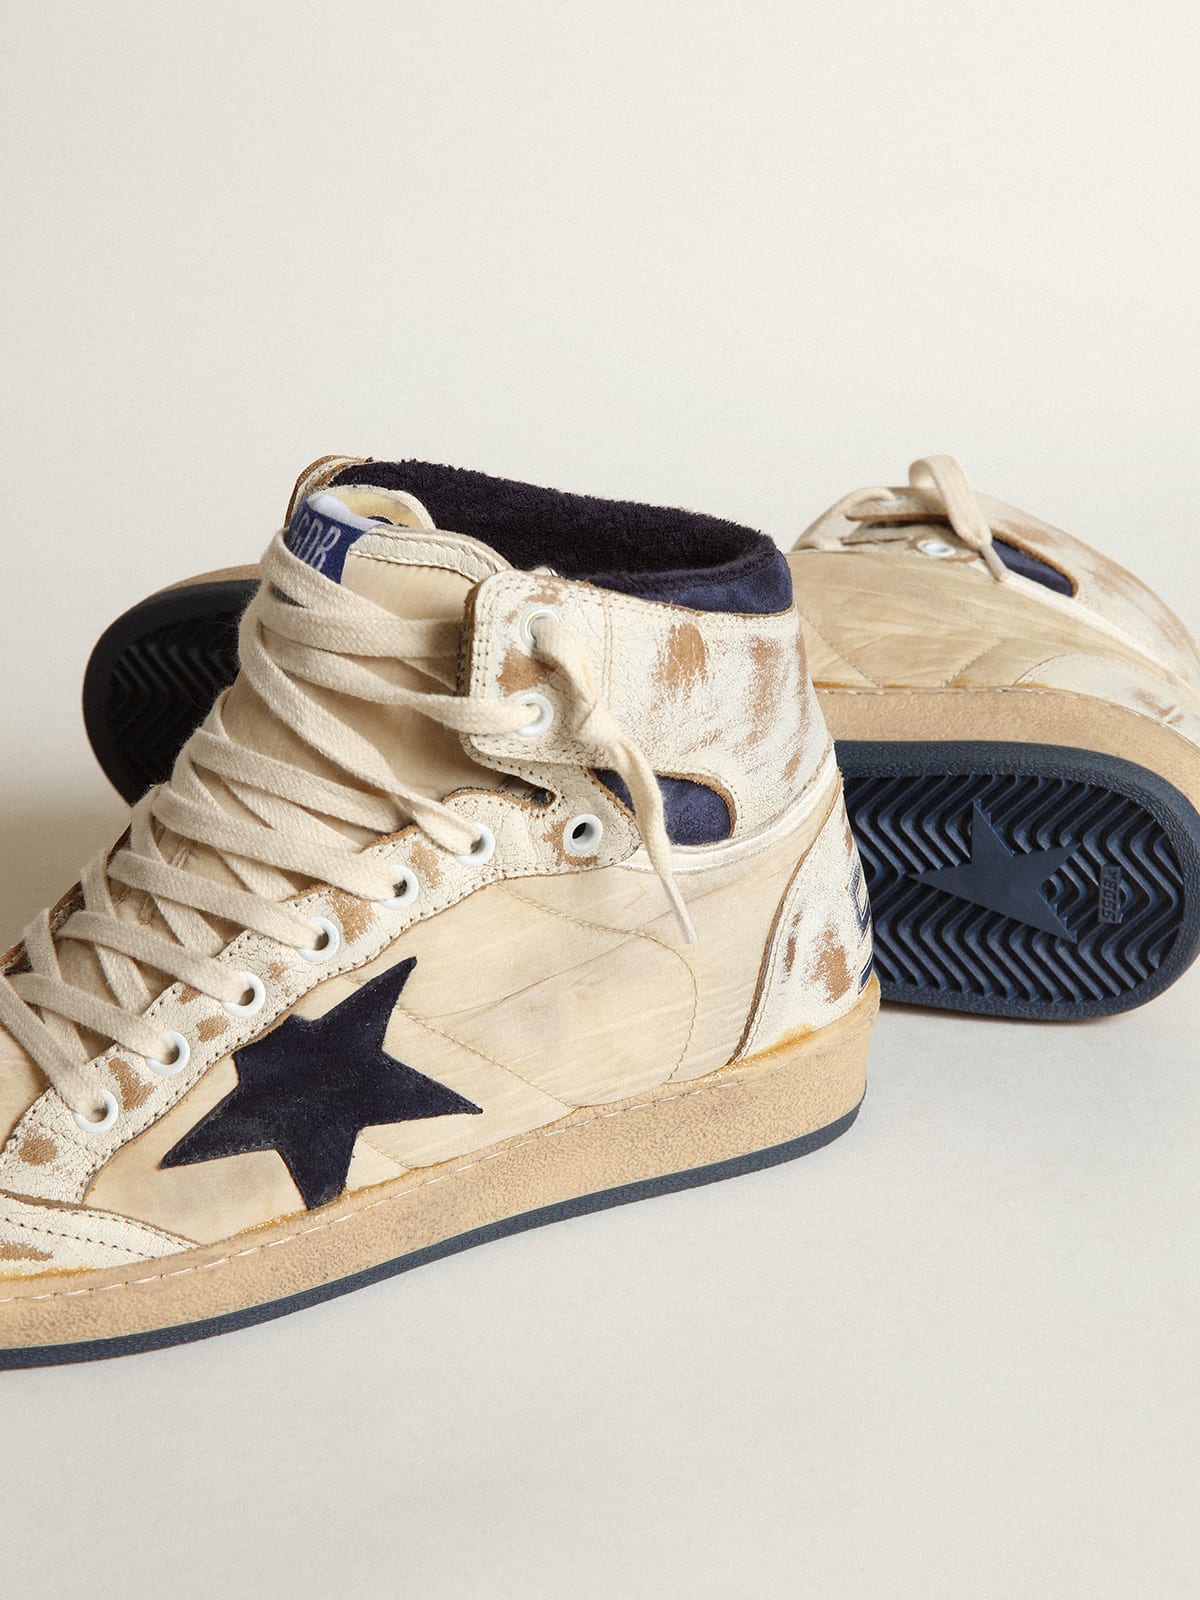 Golden Goose - Men’s Sky-Star sneakers in cream-colored nylon and white leather with dark blue suede star in 